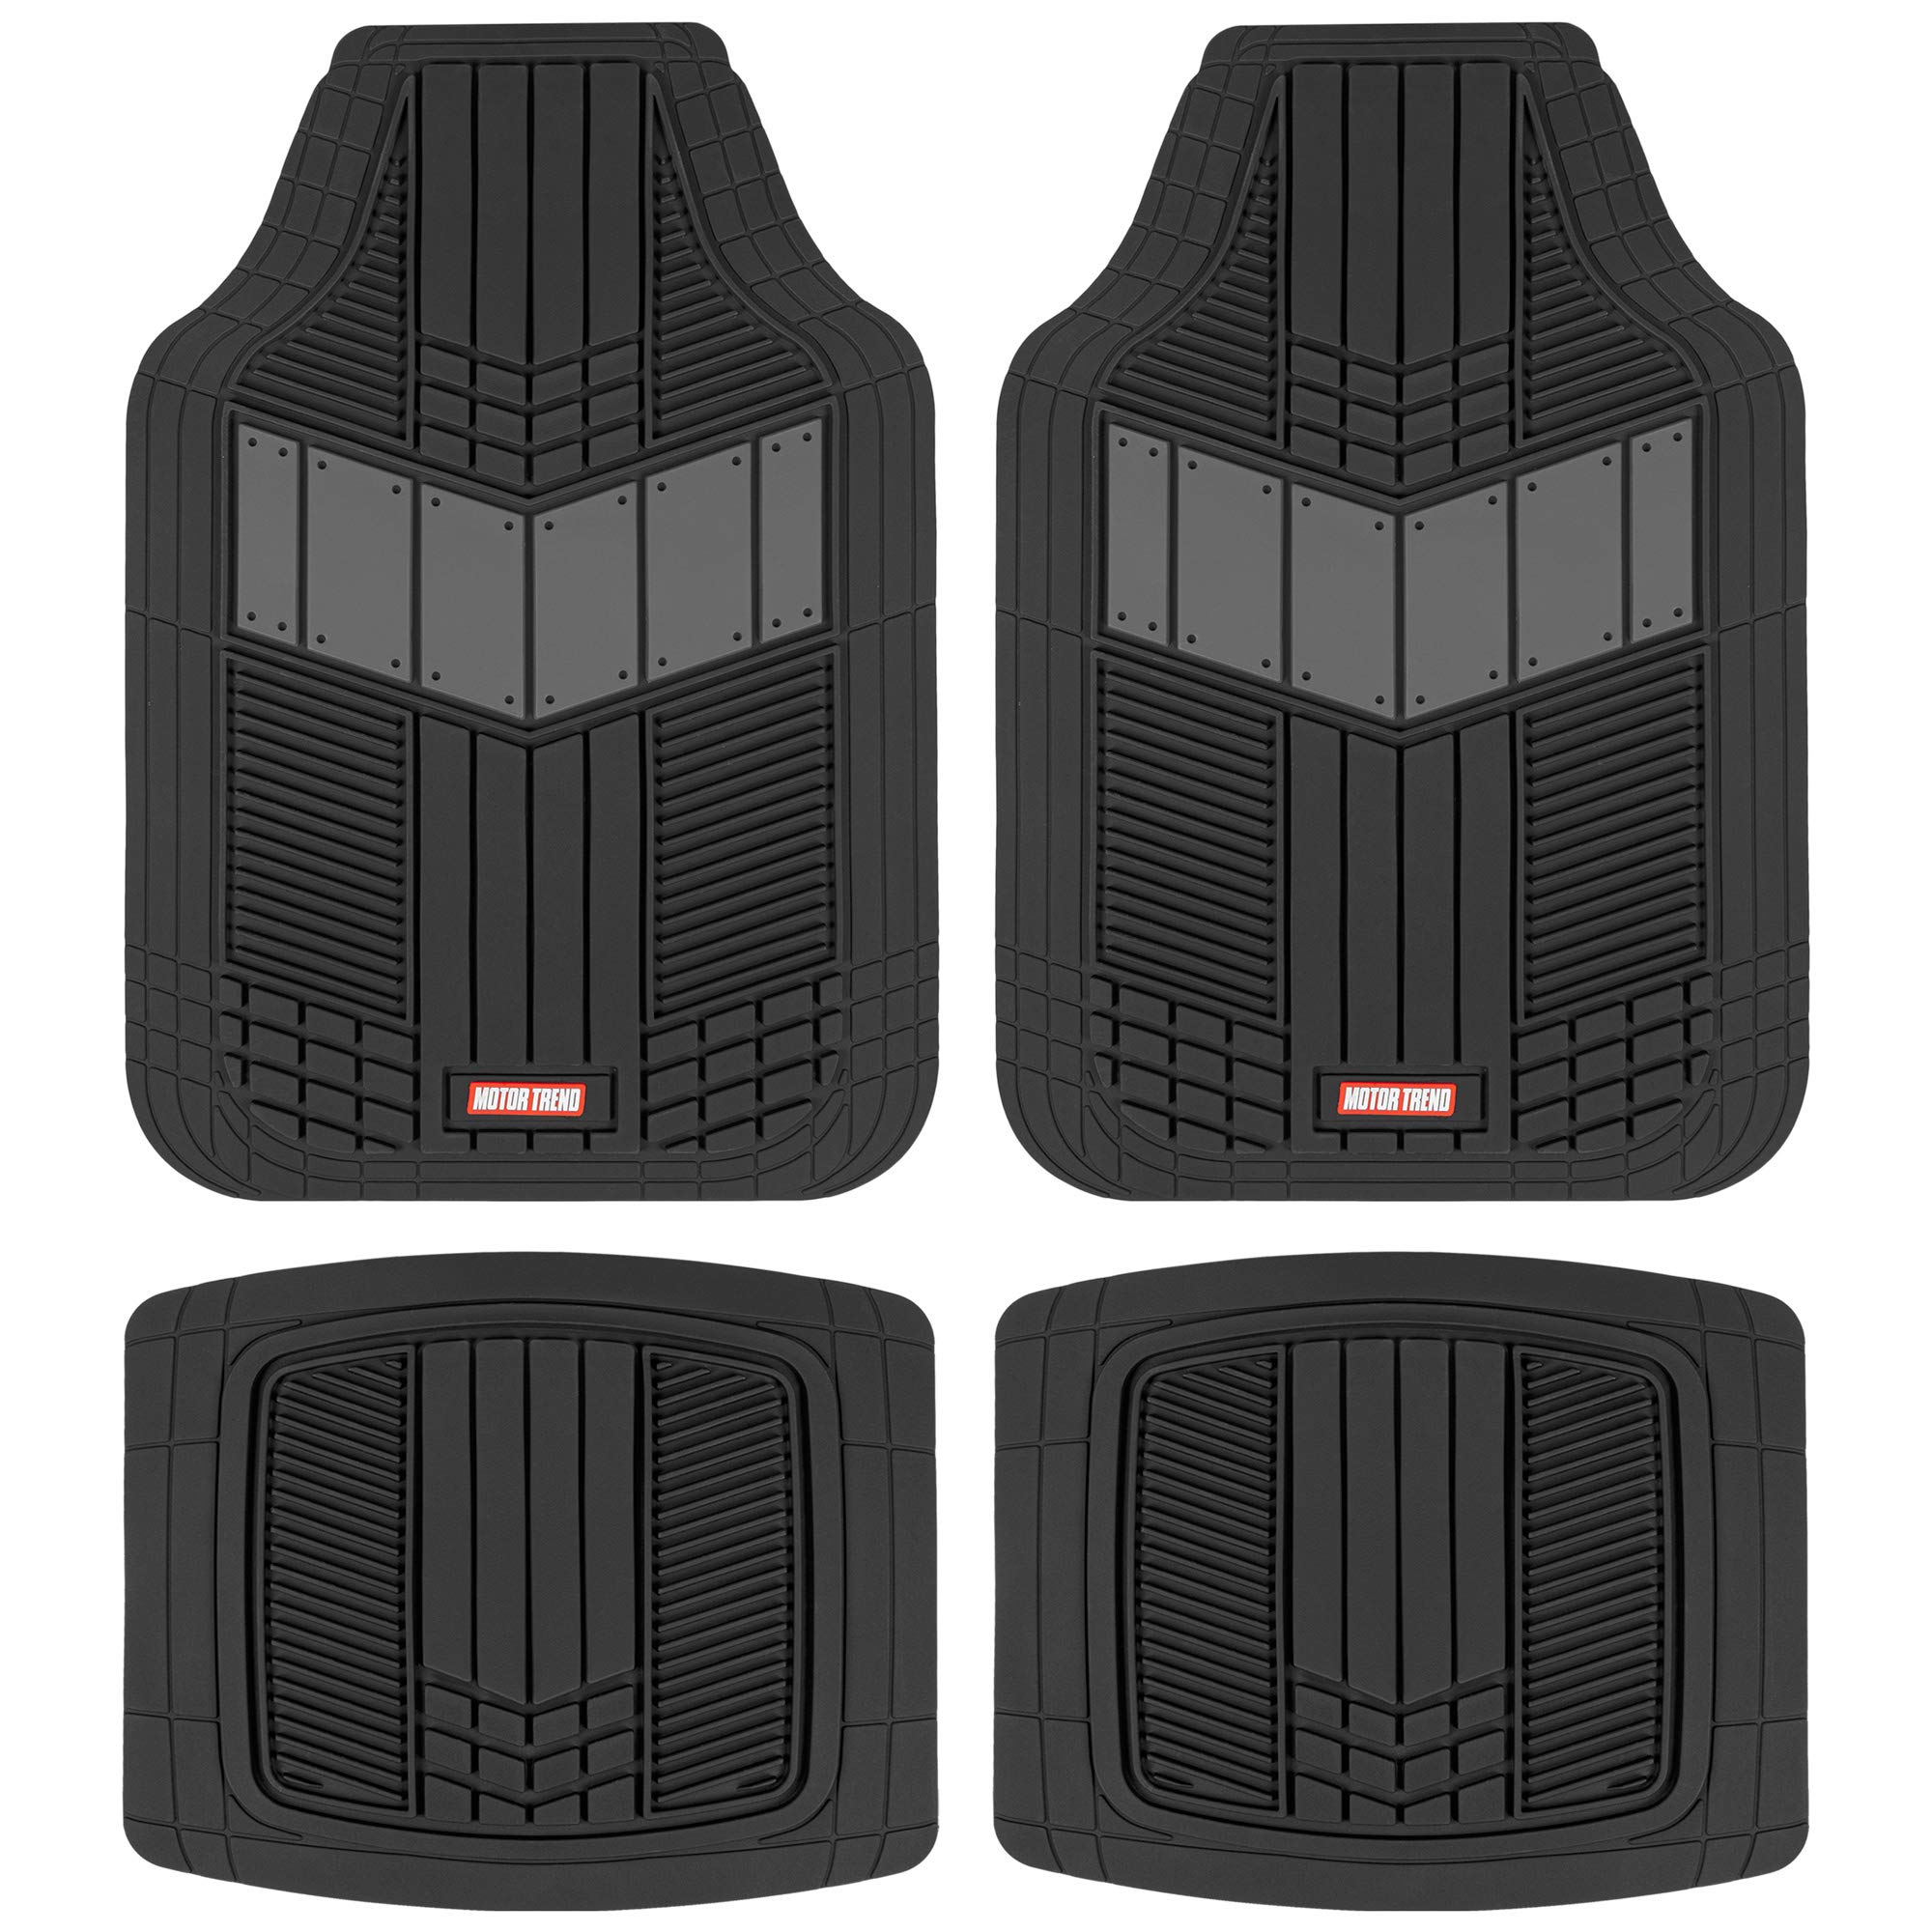 Motor Trend DualFlex Two-Tone Sport Design All-Weather Rubber Floor Mats for Car, Truck, Van & SUV - Waterproof Front & Rear Liners with Drainage Channels